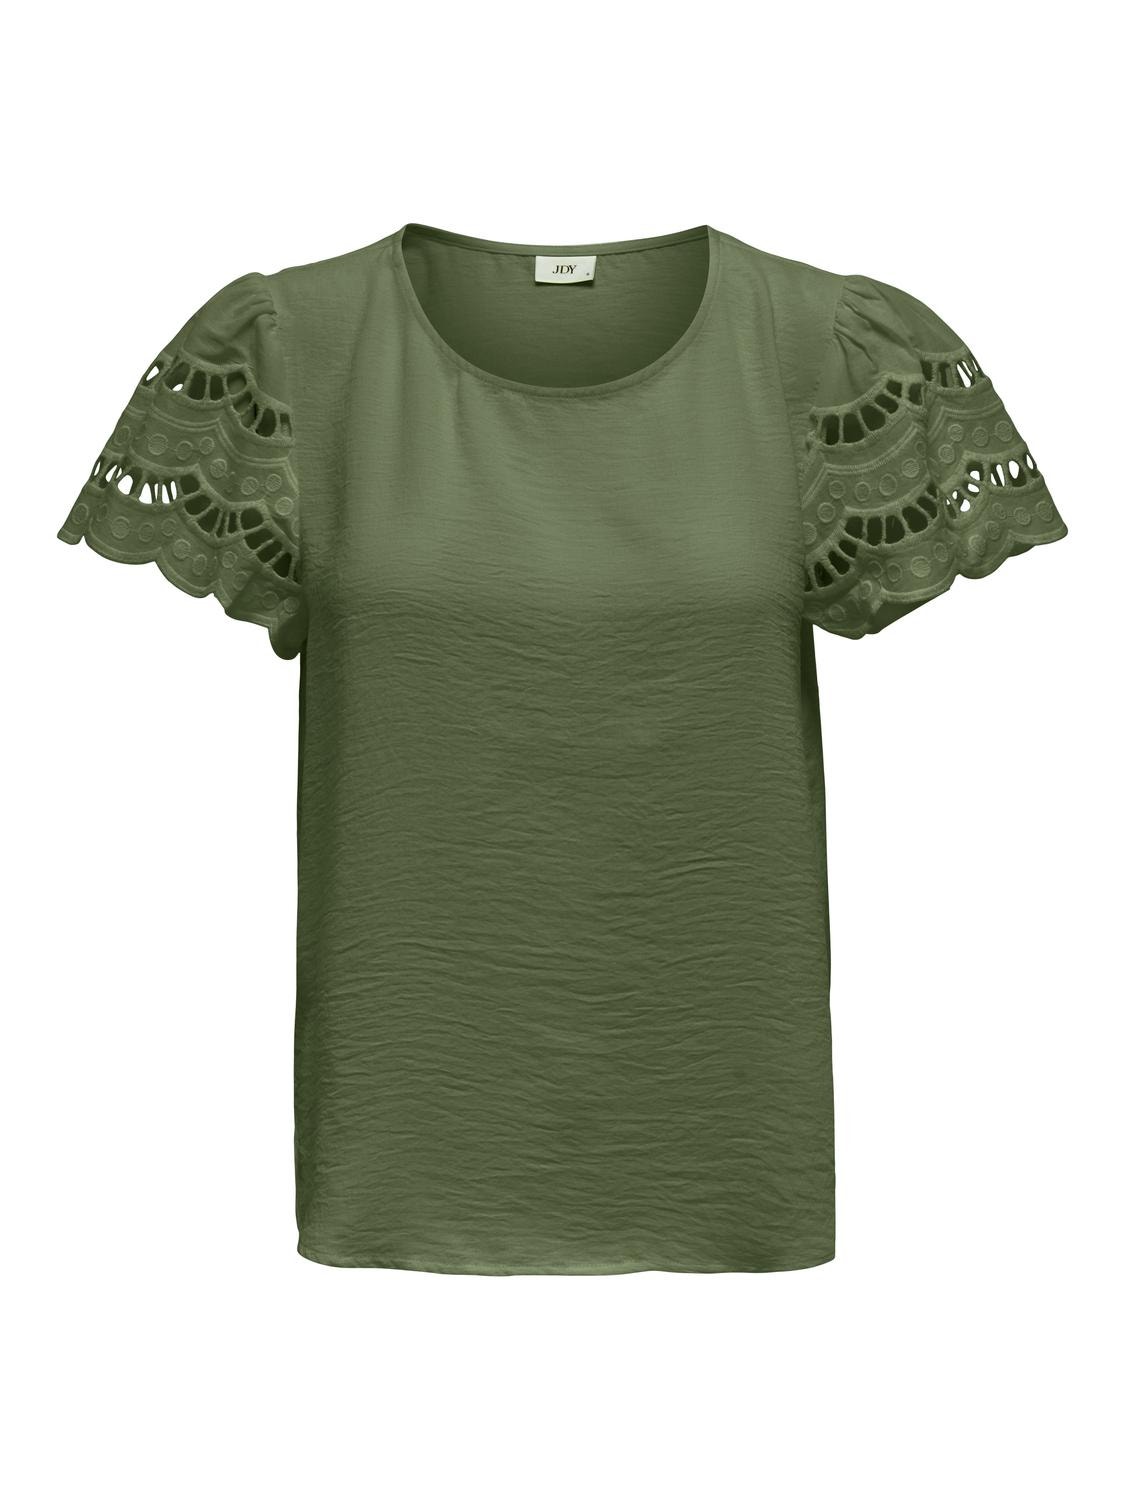 ONLY Top with lace details -Deep Lichen Green - 15312609